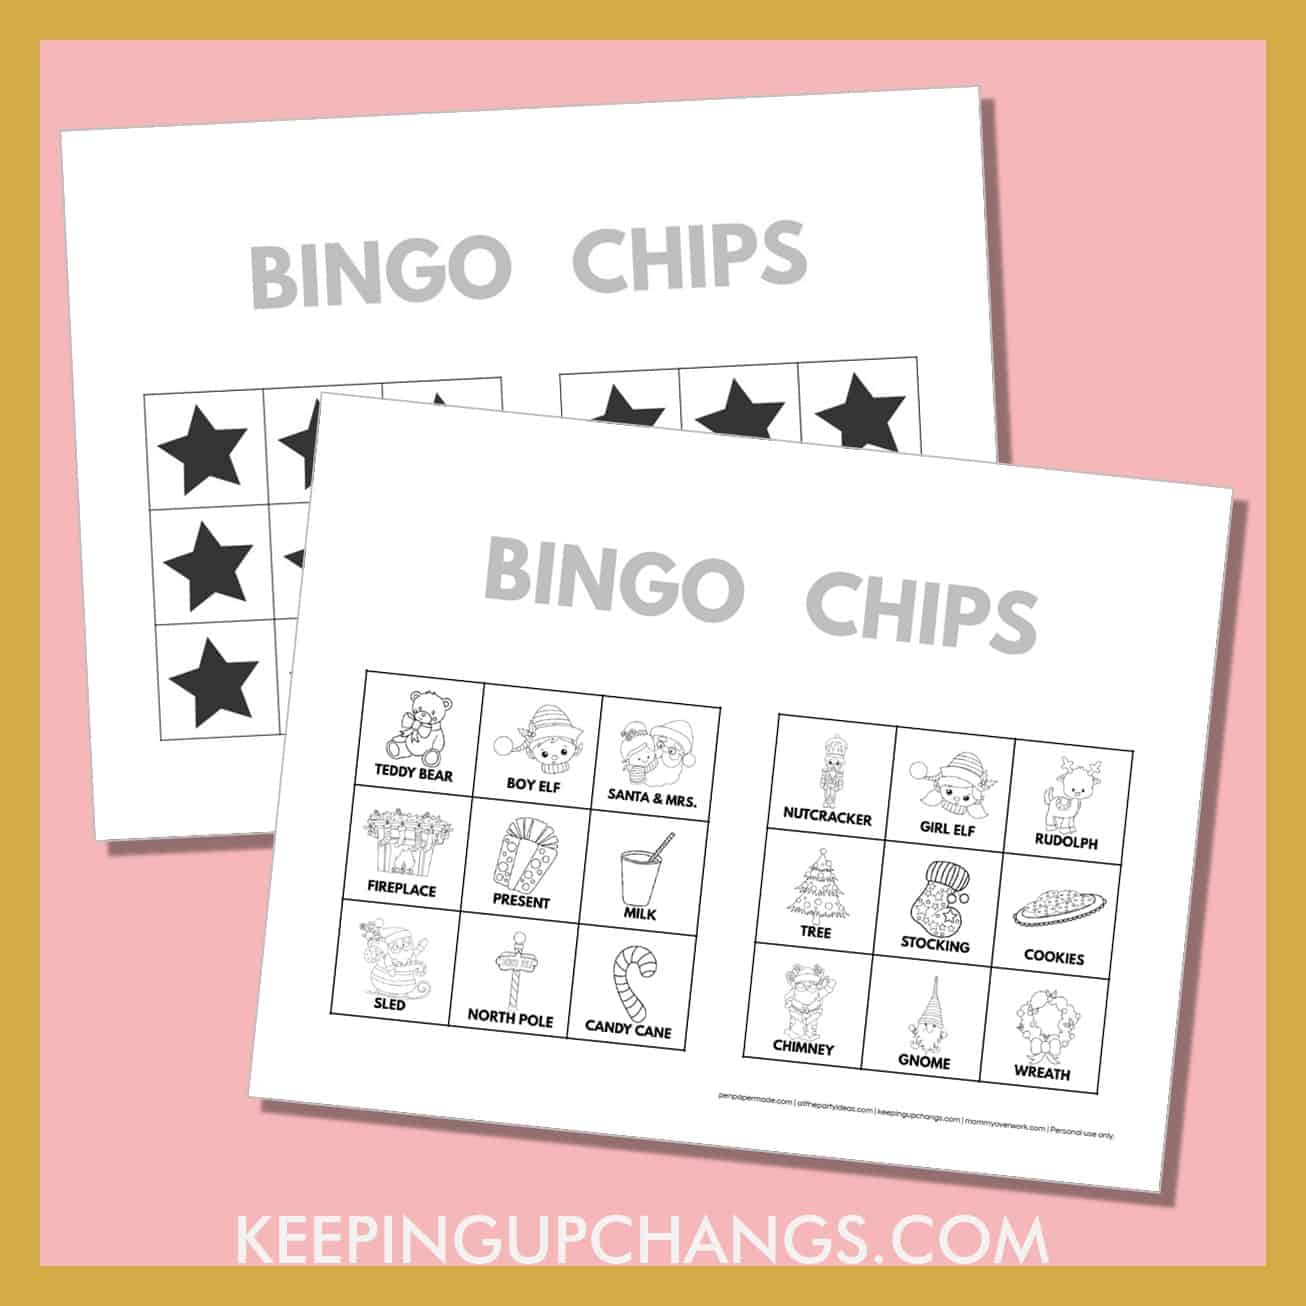 free christmas bingo card 3x3 black white coloring game chips, tokens, markers.